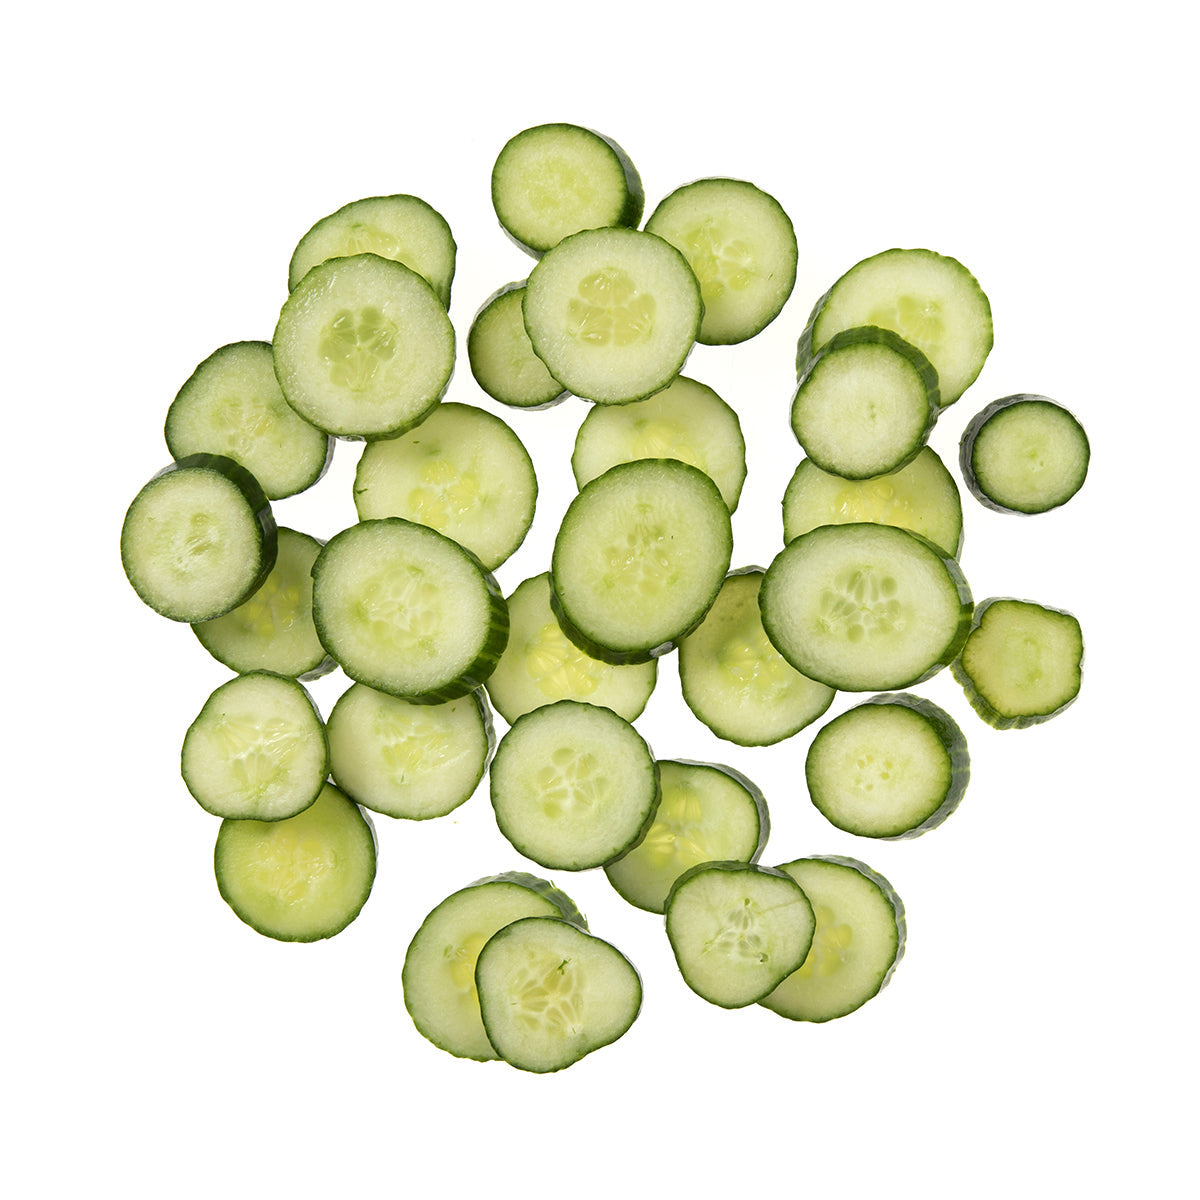 BoxNCase Sliced Select Cucumbers 5 LB